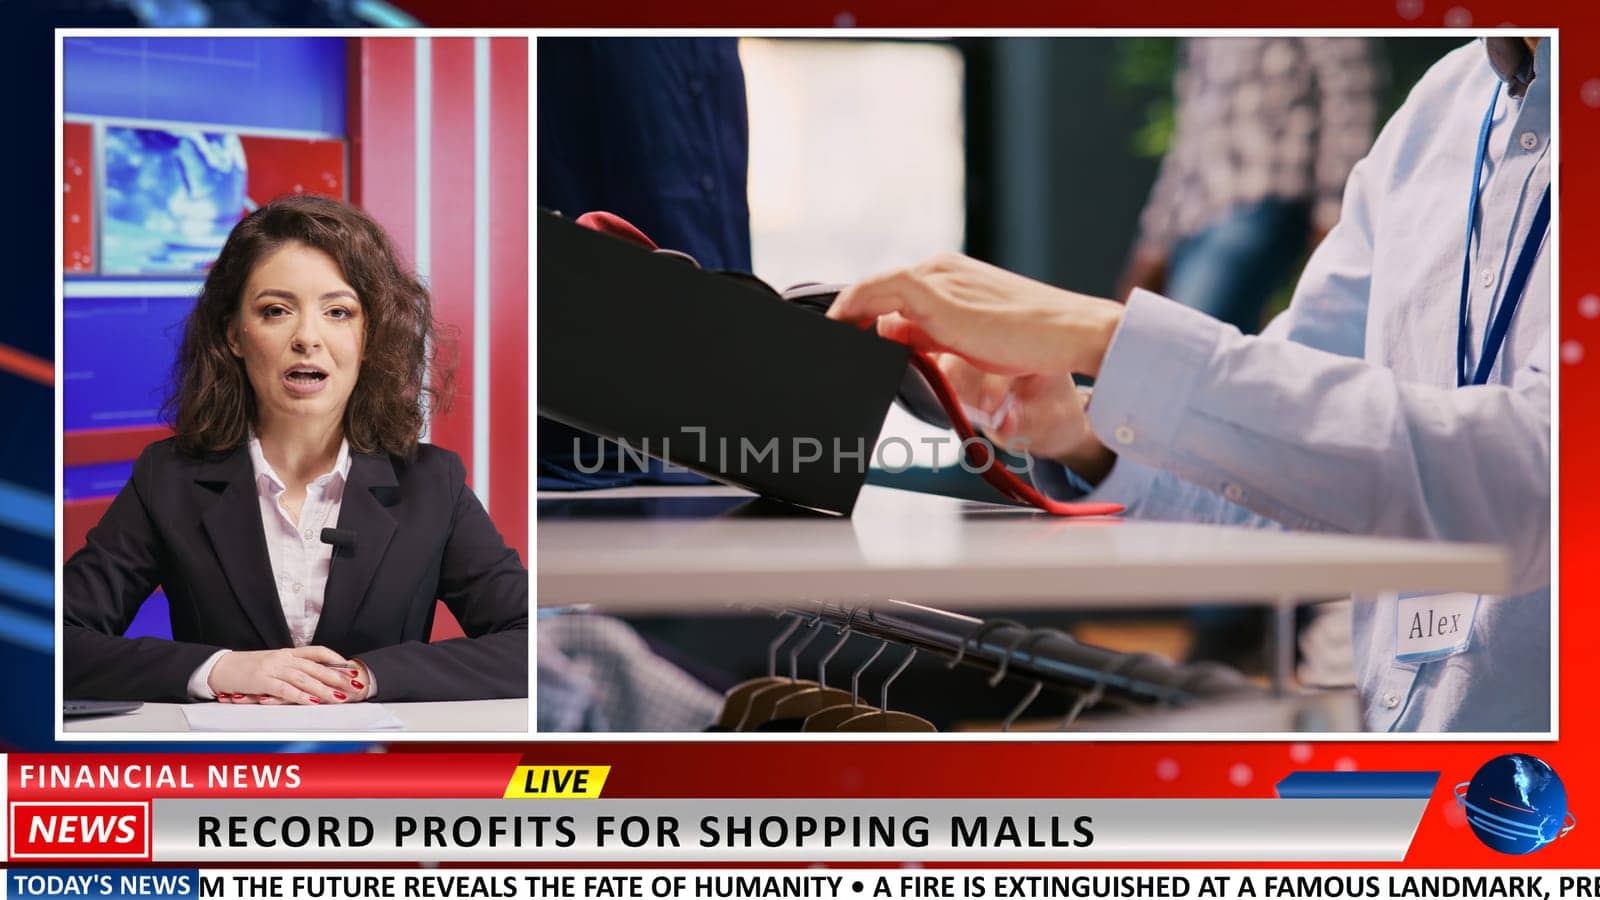 Reporter talk about shopping success and retail store profit during sales season, presenting latest news in fashion trends on international television. Woman presenter advertisement.